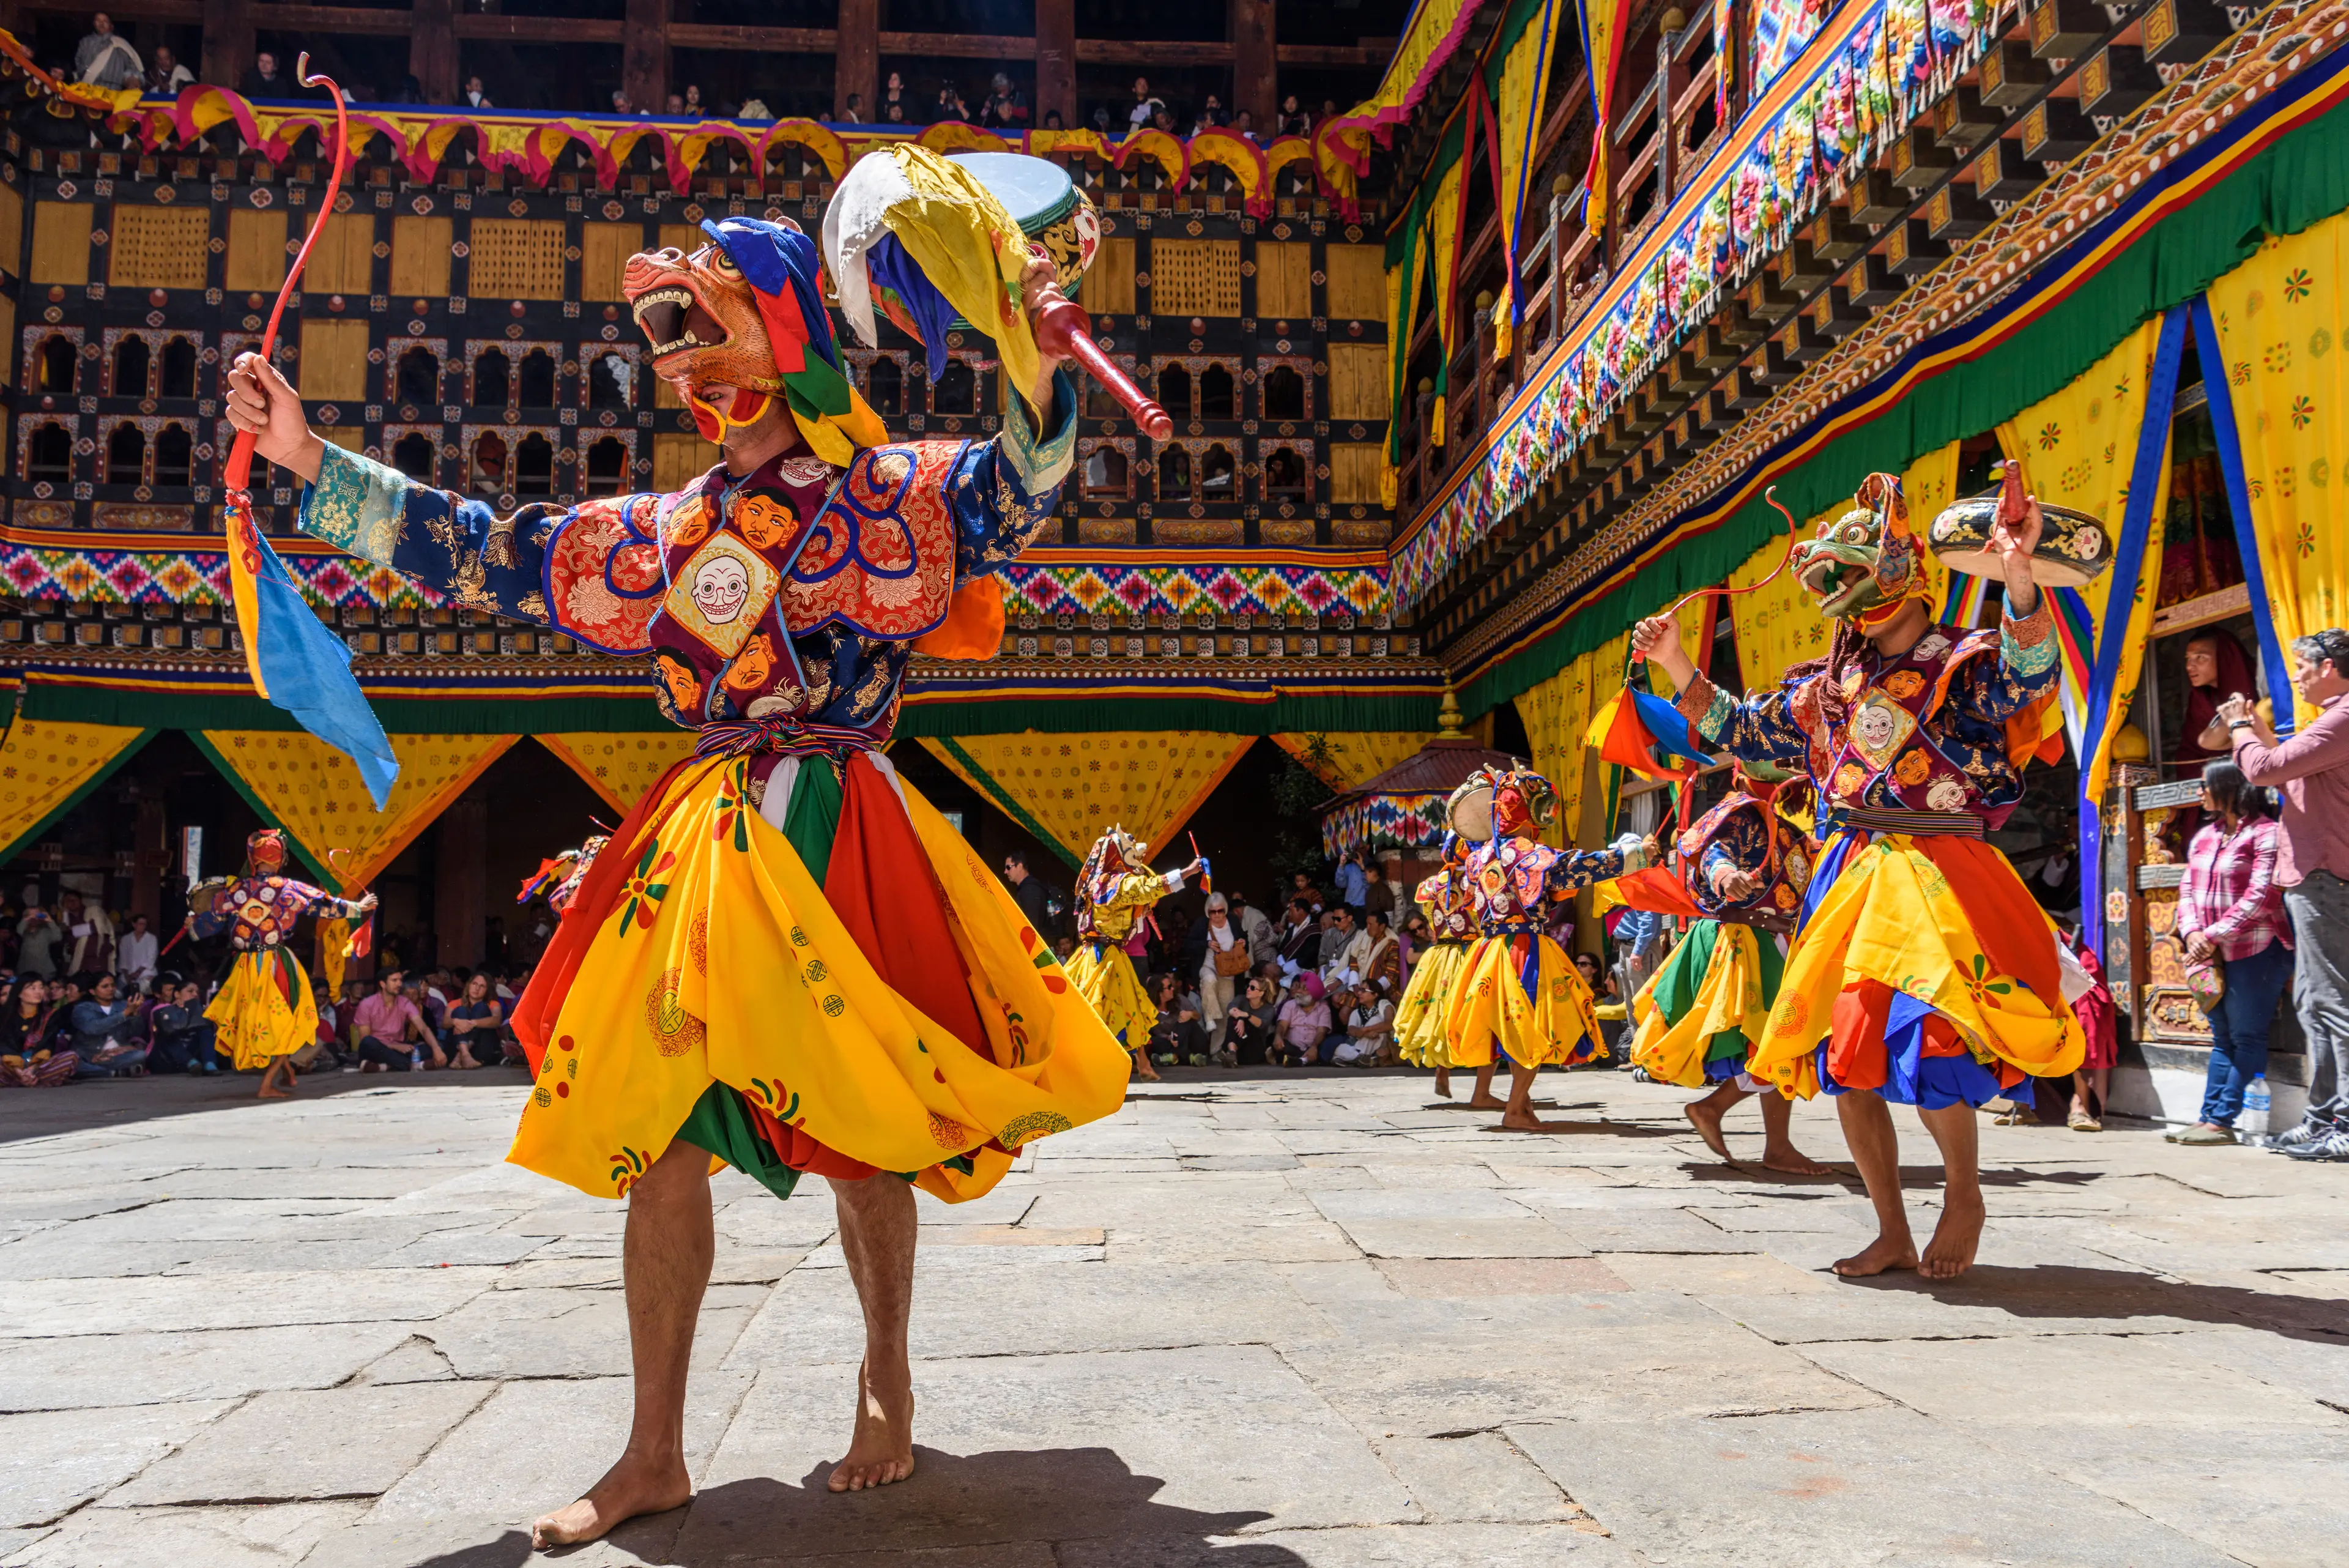 3-Day Local Culinary and Sightseeing Adventure in Bhutan with Friends